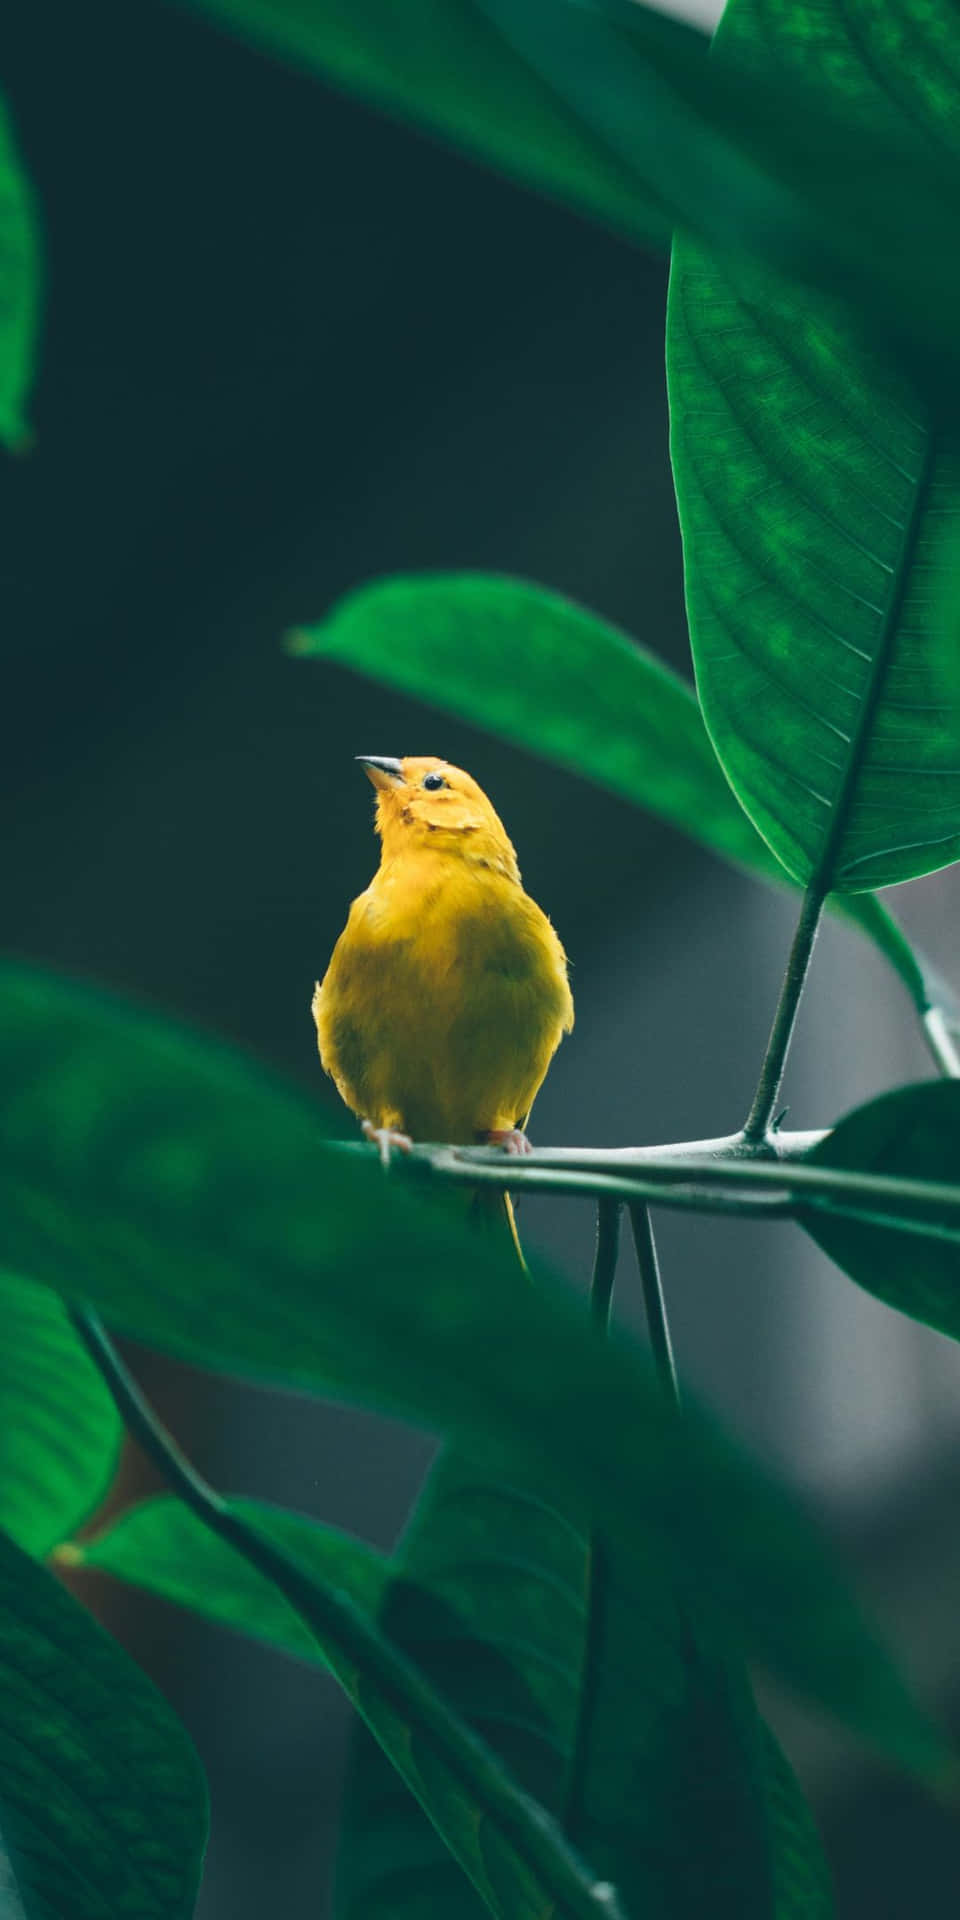 Yellow Bird On A Branch With Green Leaves Wallpaper